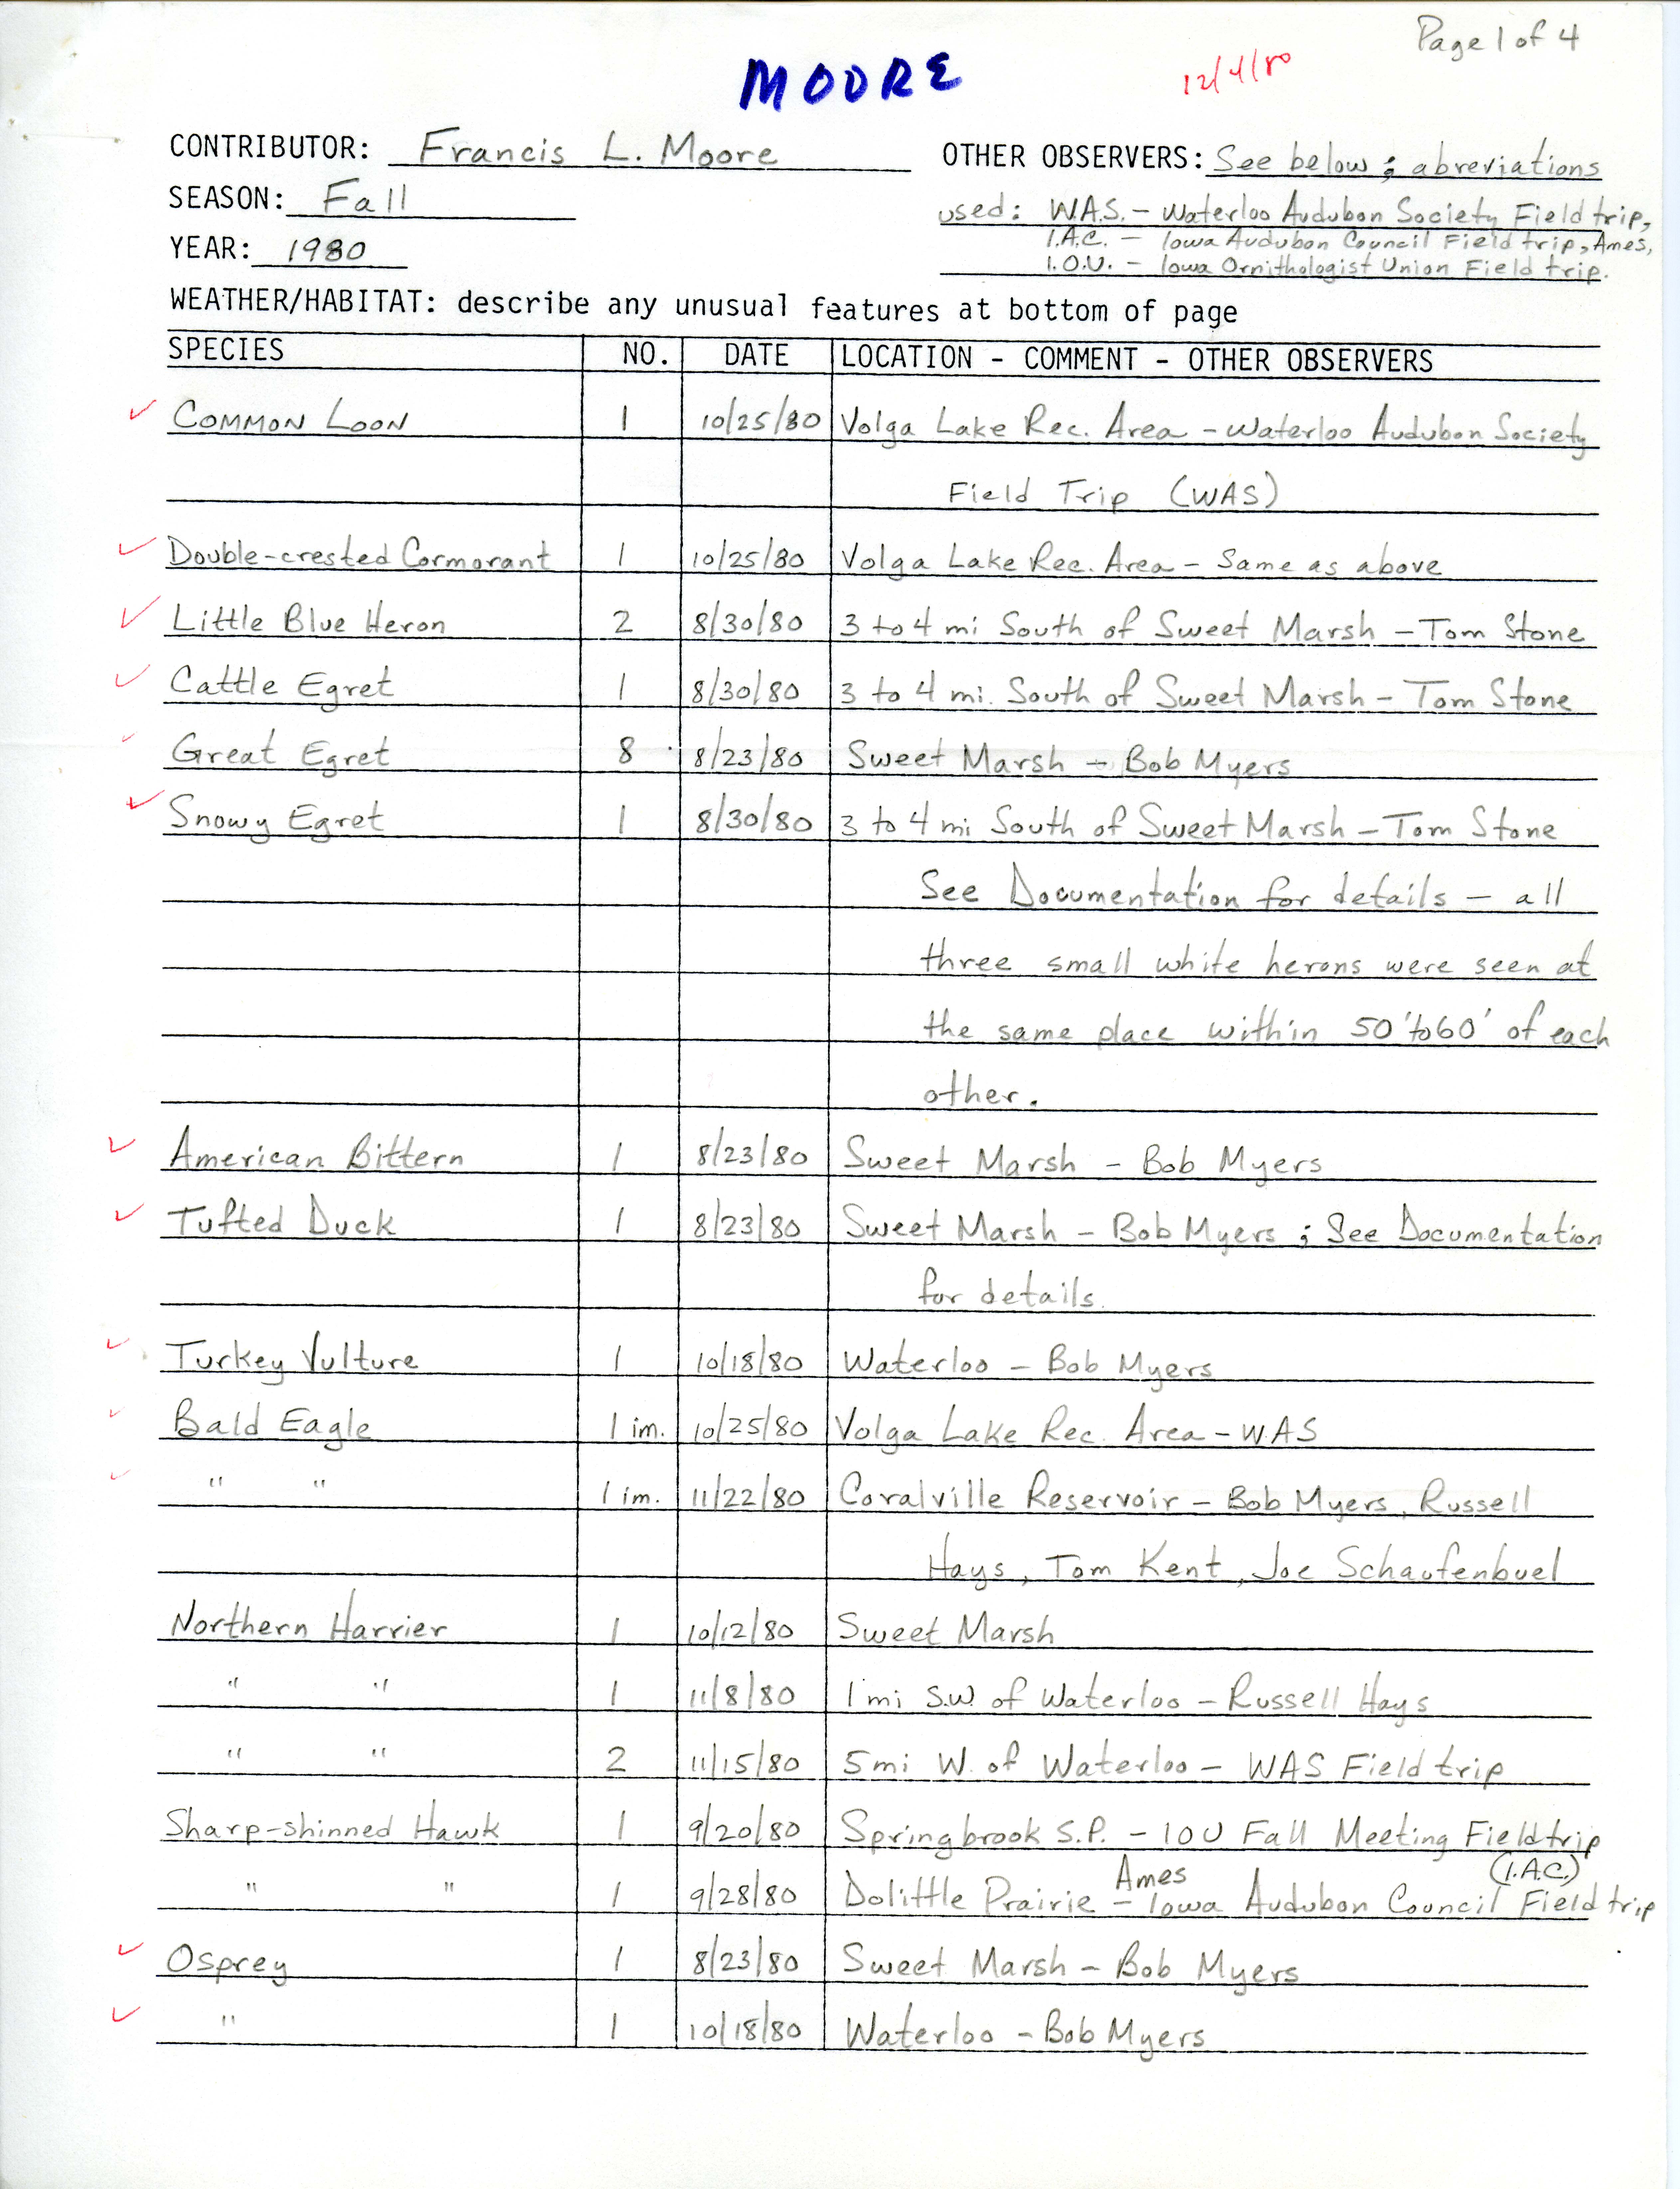 Annotated bird sighting list for Fall 1980 submitted by Francis L. Moore